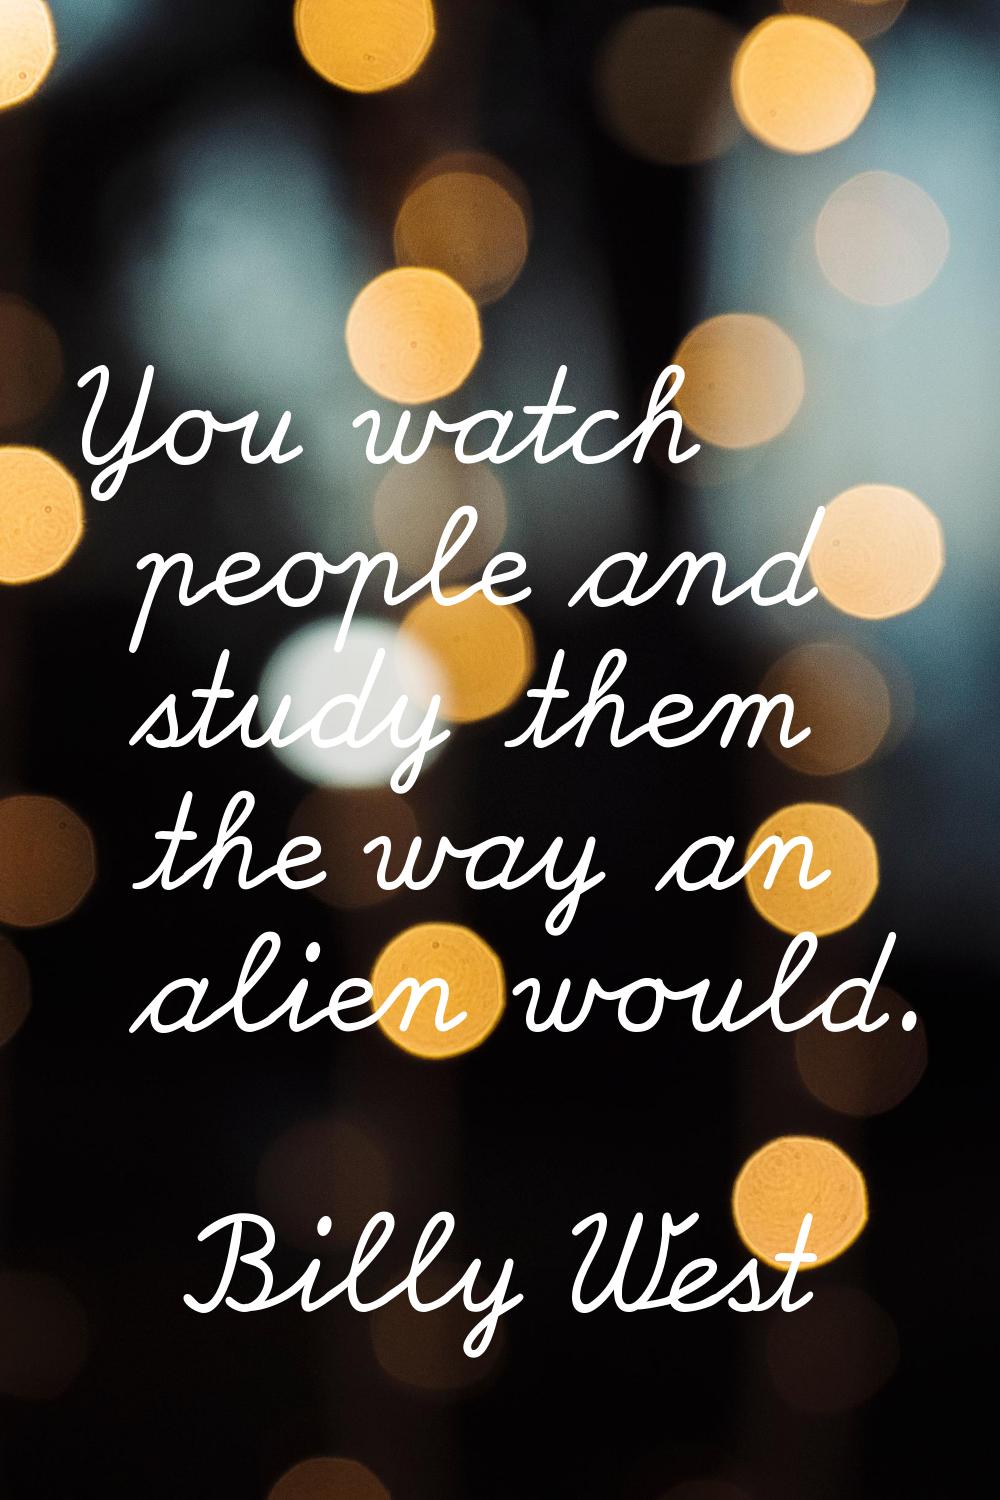 You watch people and study them the way an alien would.